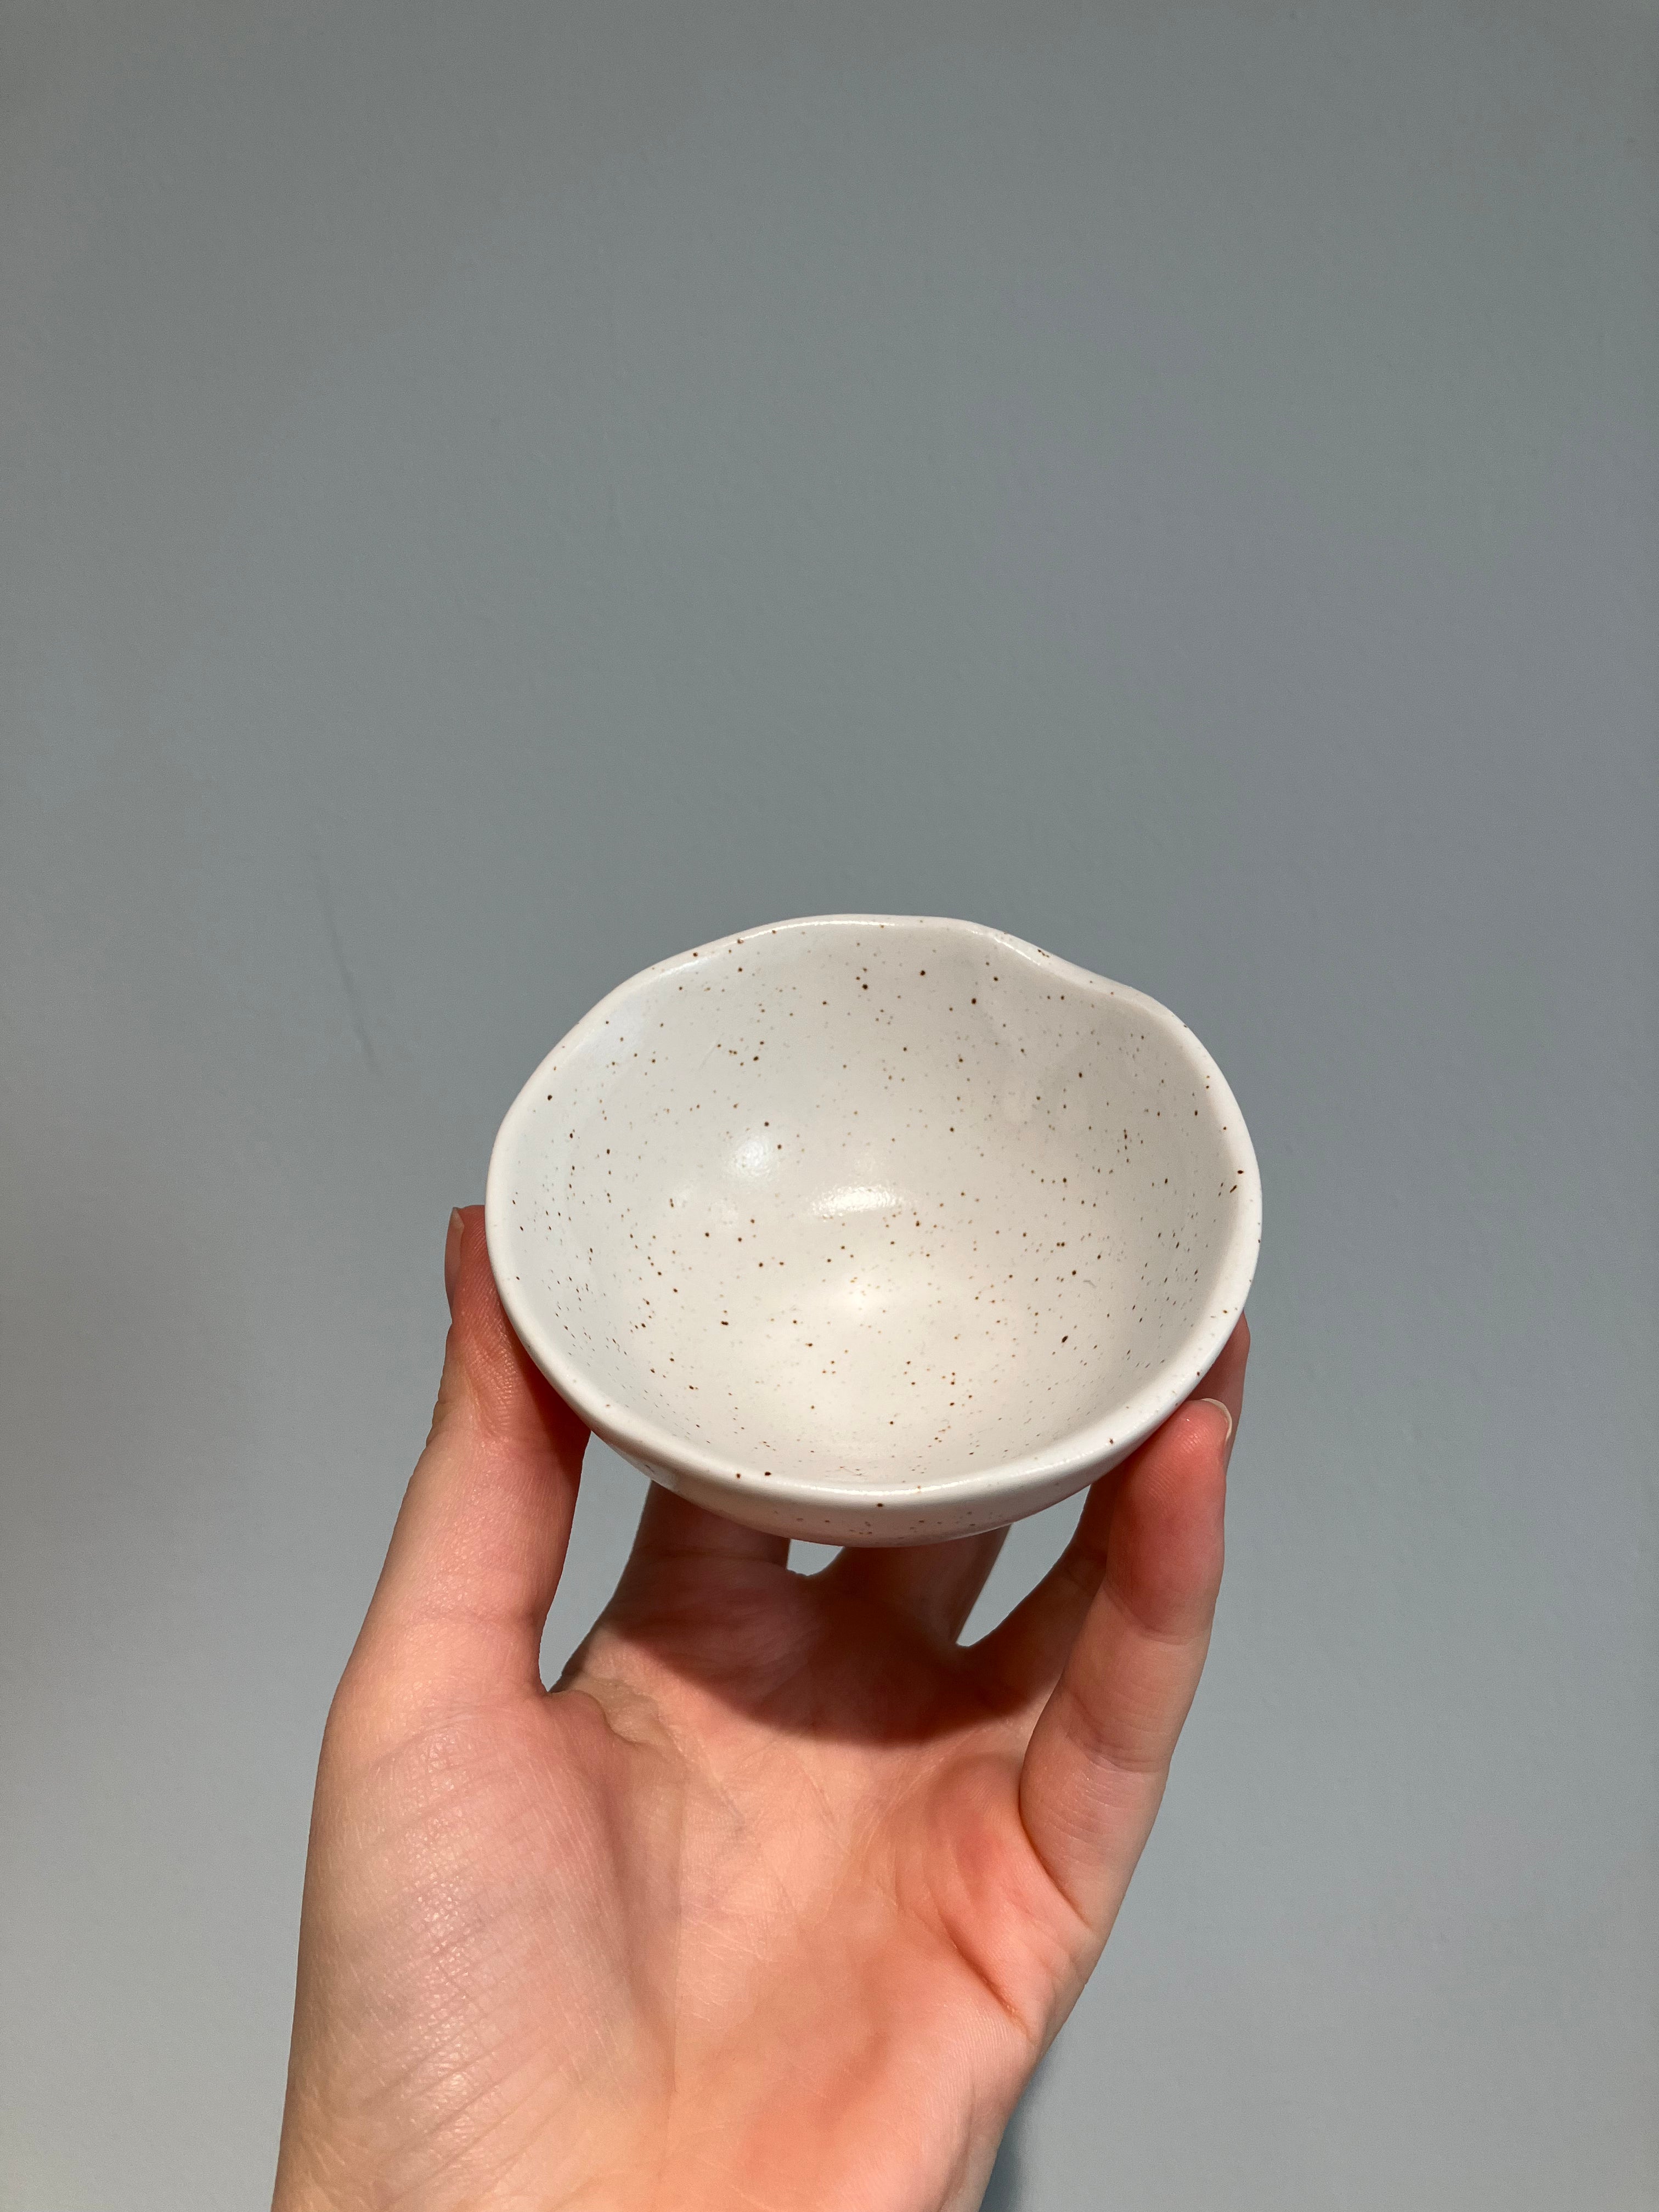 Small white organic bowl with brown dots and feet